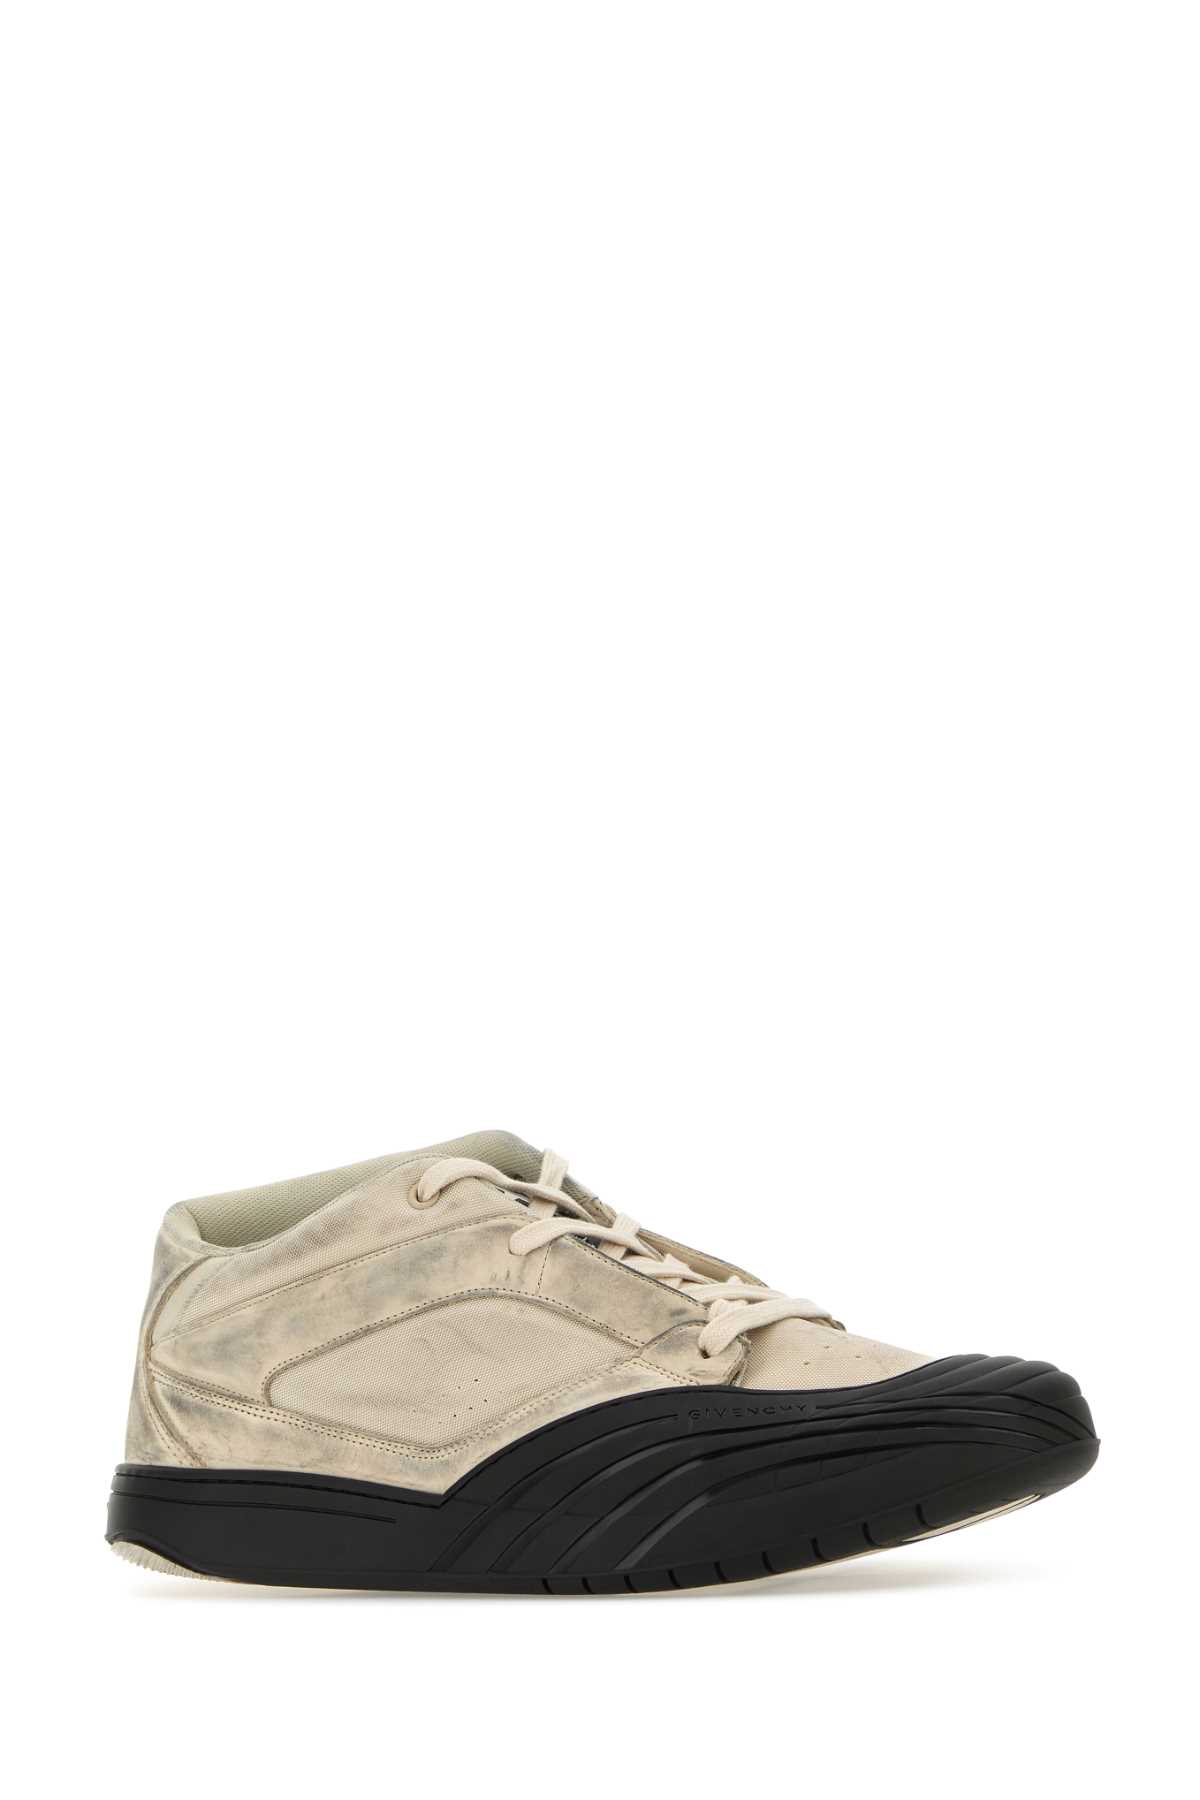 Givenchy Sand Fabric And Leather Skater Sneakers In White